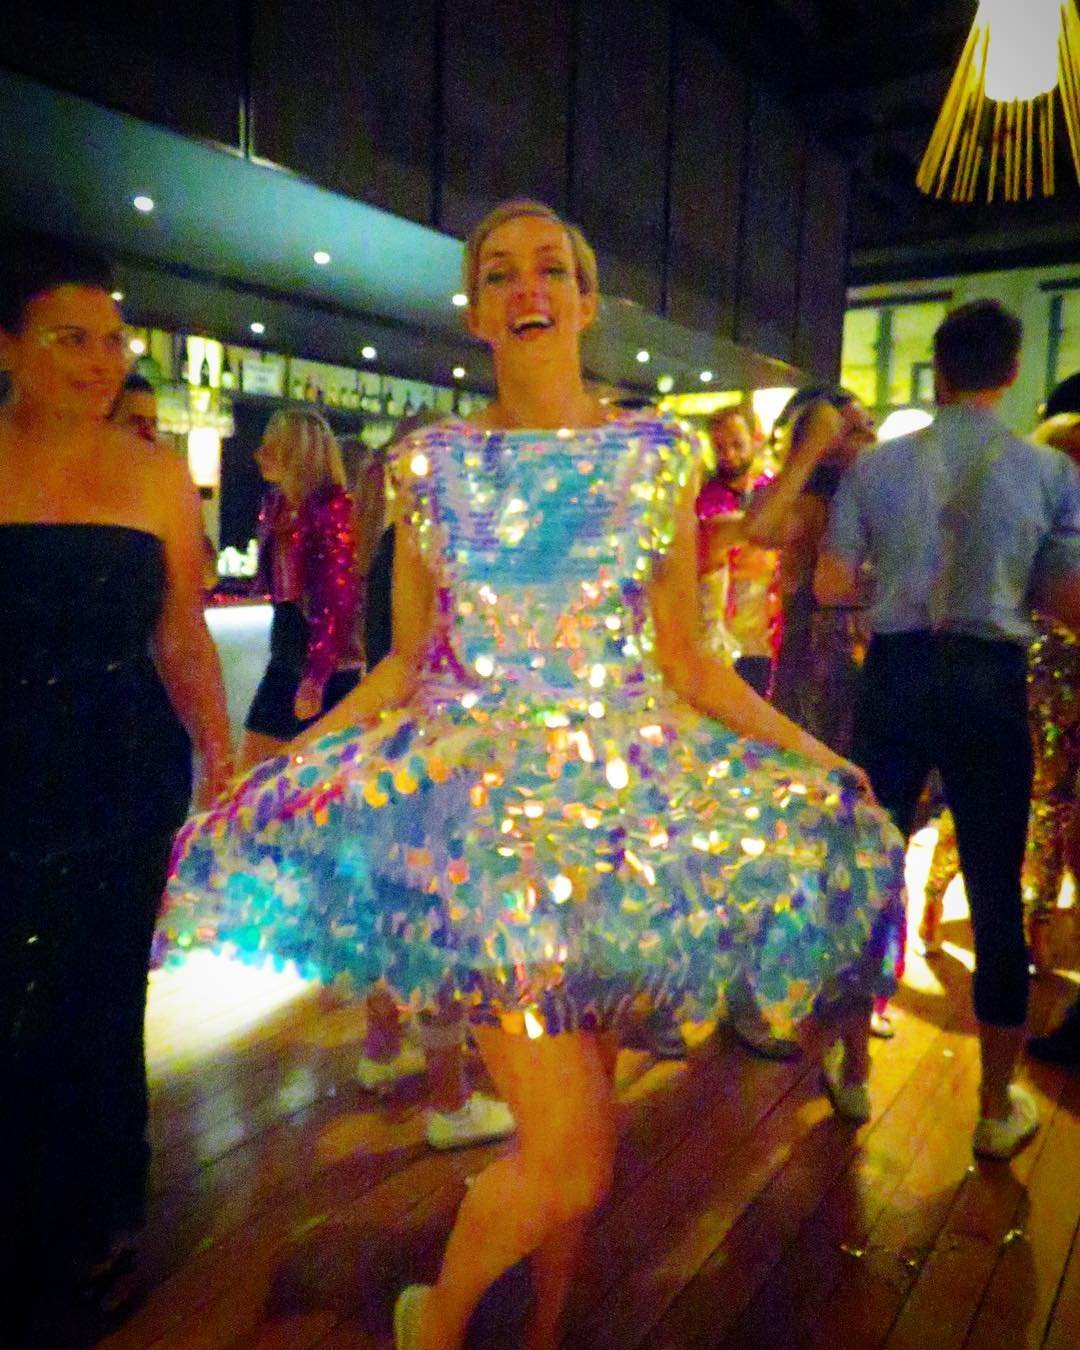 Sparkle Queen Daisy shining bright at her birthday party 🥳 ✨💖🙌😍
.
.
#party #partydress #sequindress #costume #custommade #birthdaygirl #sequins #sparkleparty #sparkle #glitter #dressup #custom #oneoff #imaginarium #getimaginariumed